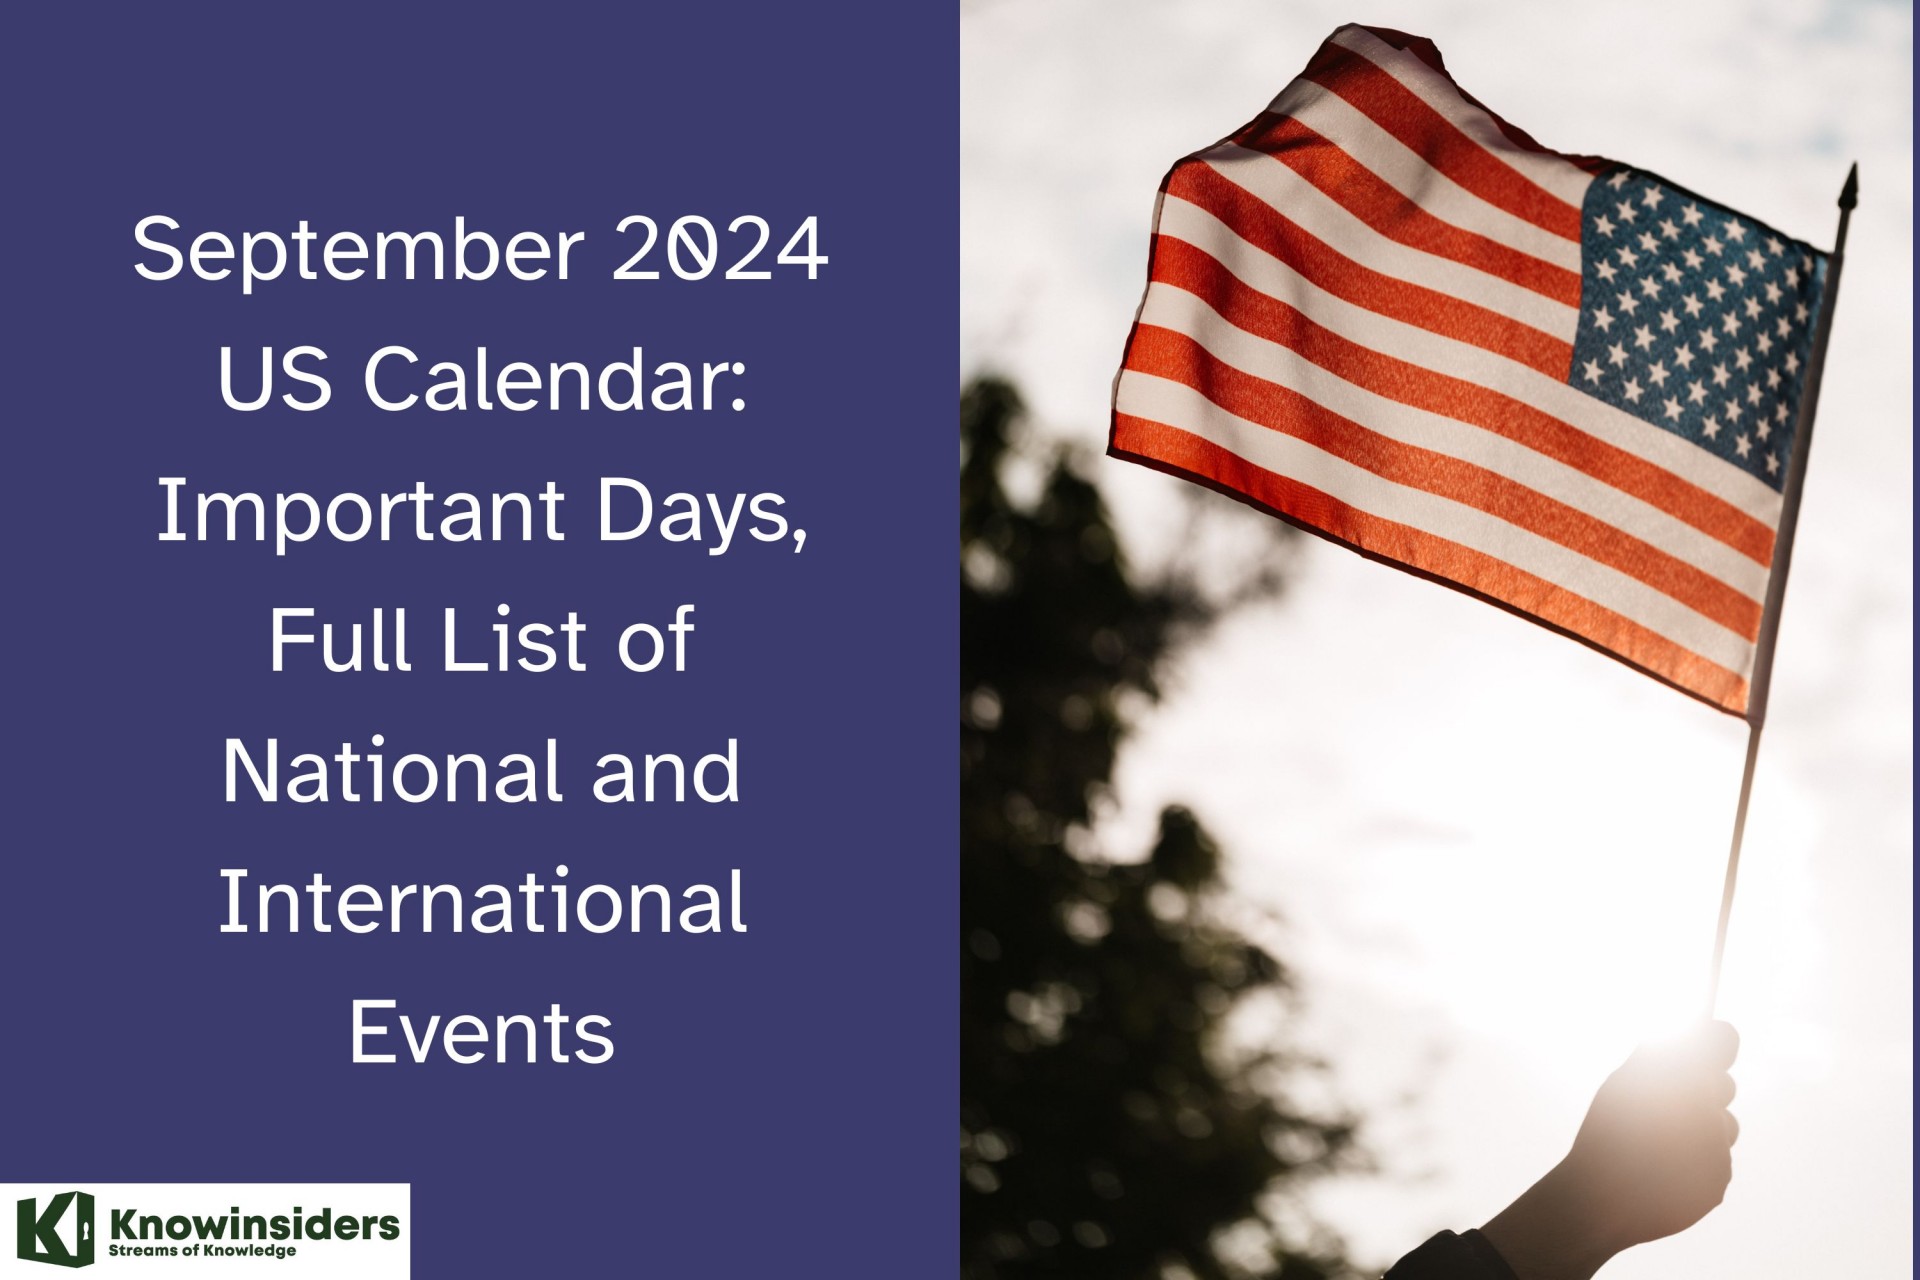 September 2024 US Calendar: Important Days, Full List of National and International Events